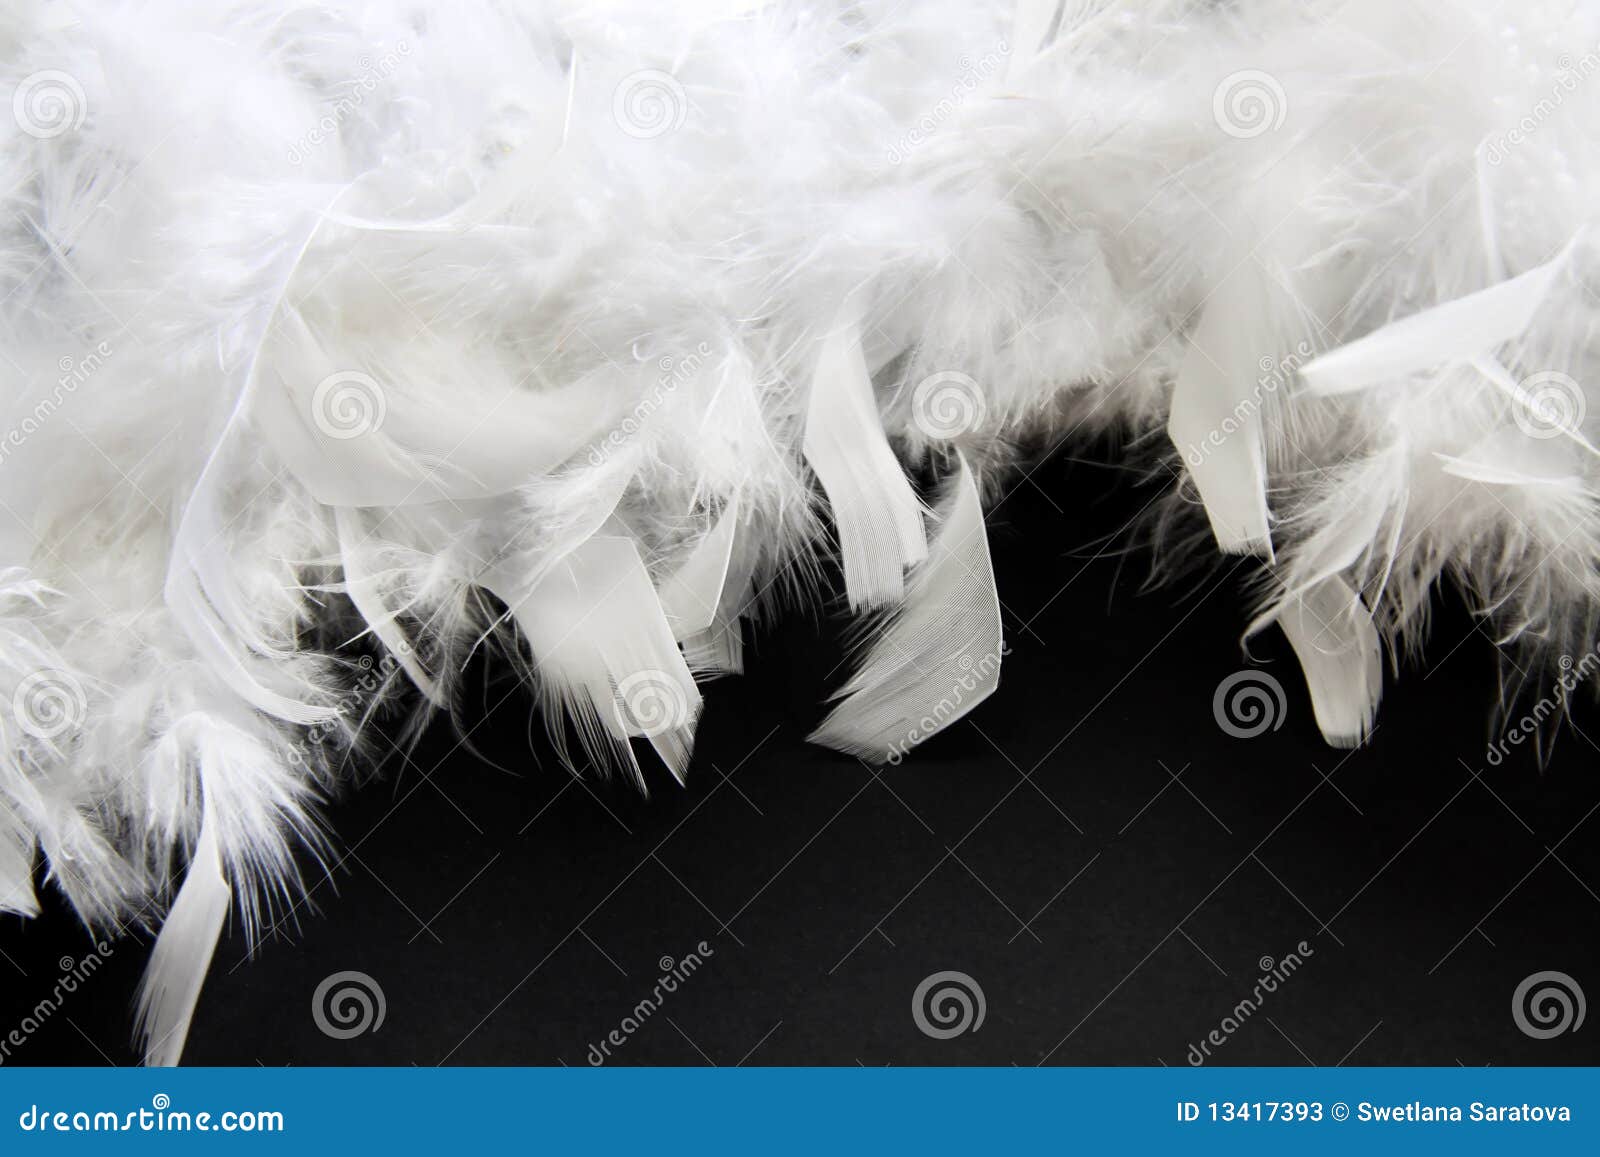 370 Bright Pink Feather Boa Stock Photos - Free & Royalty-Free Stock Photos  from Dreamstime